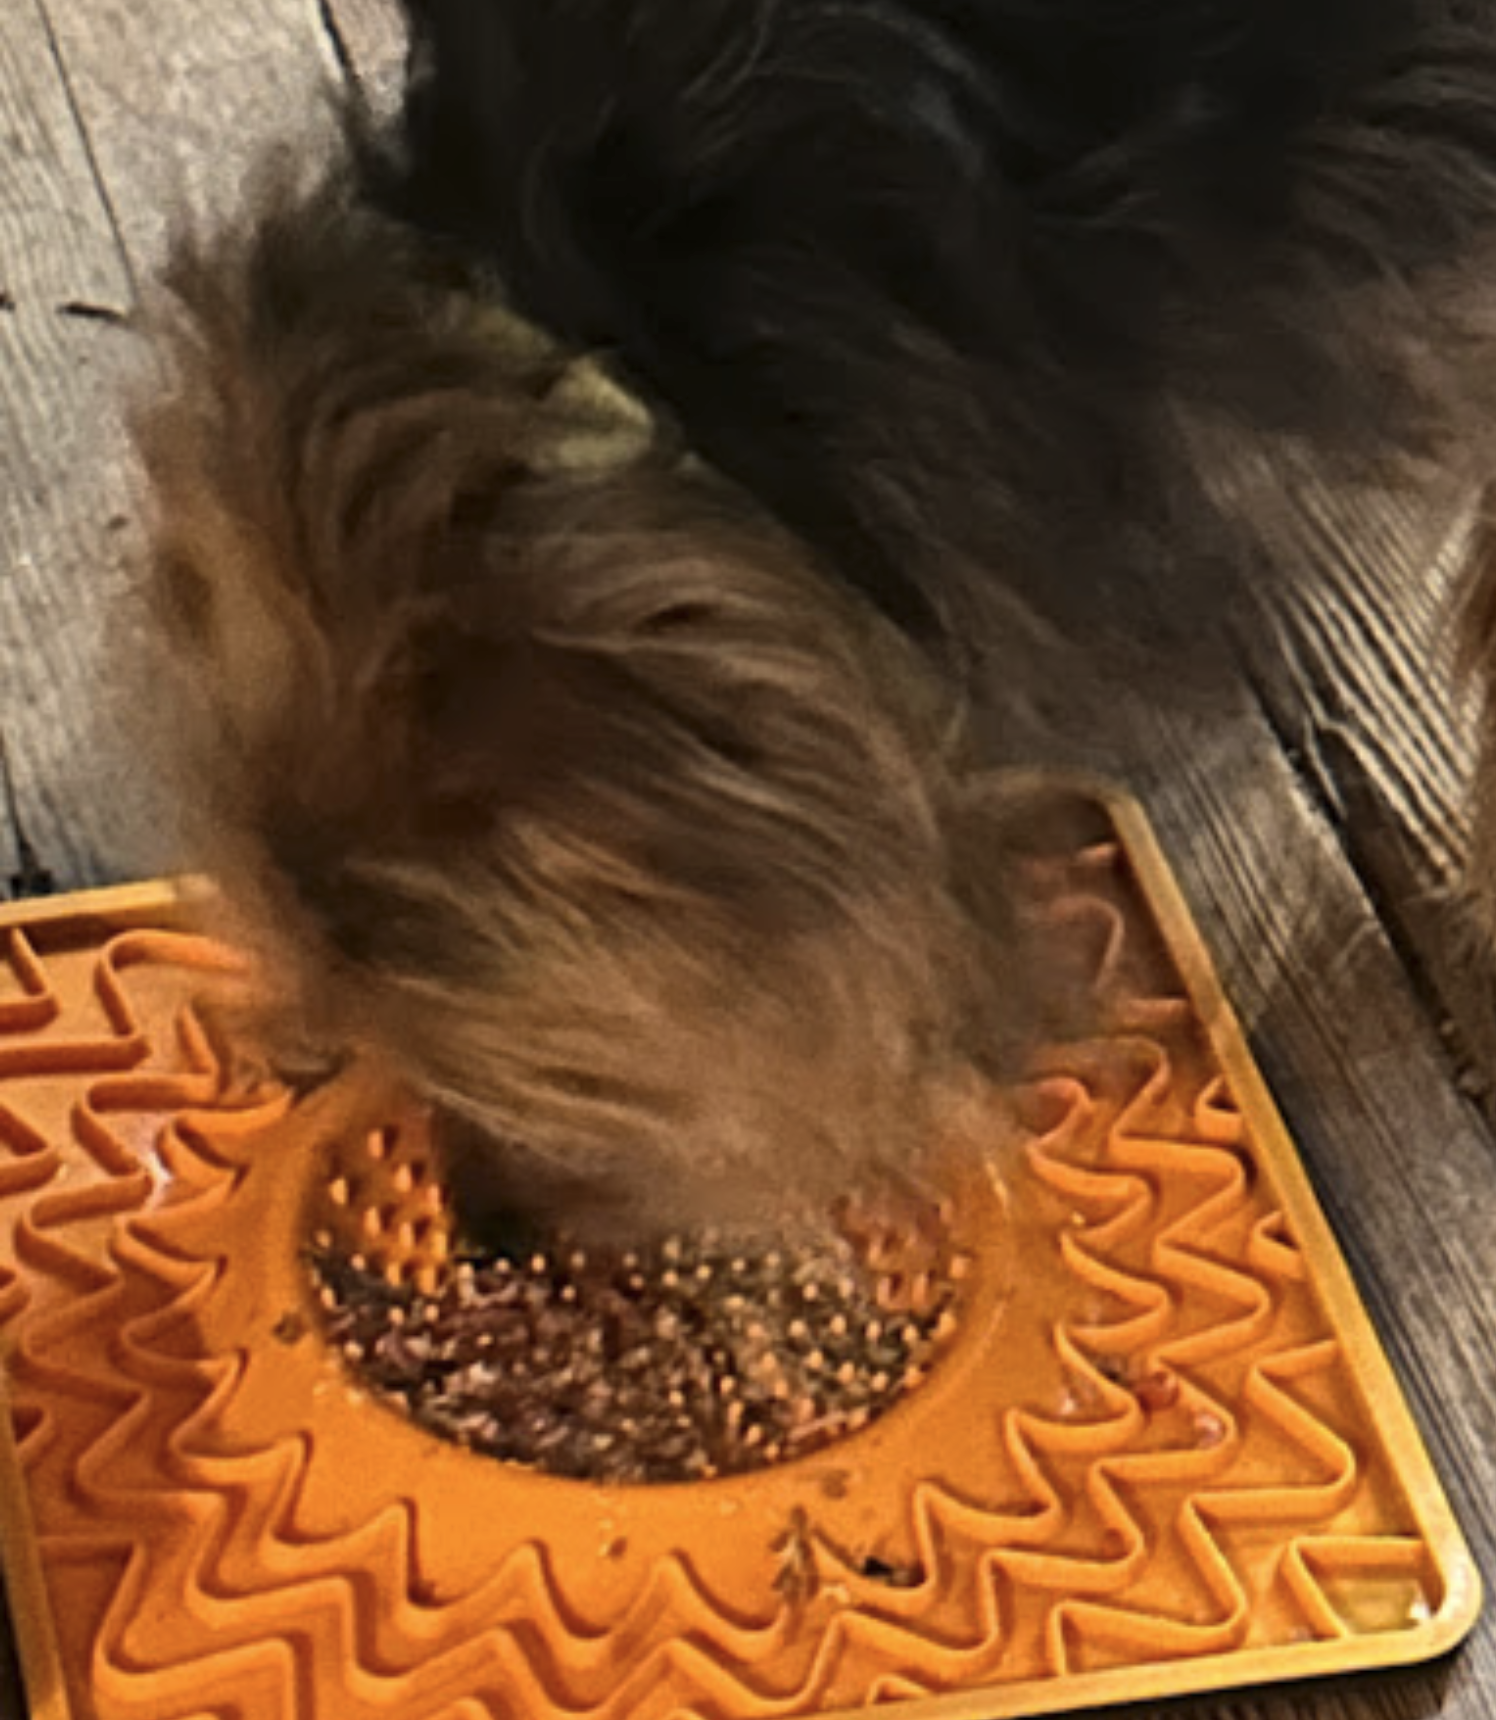 My Yorkie fell in love with Rebel Raw food